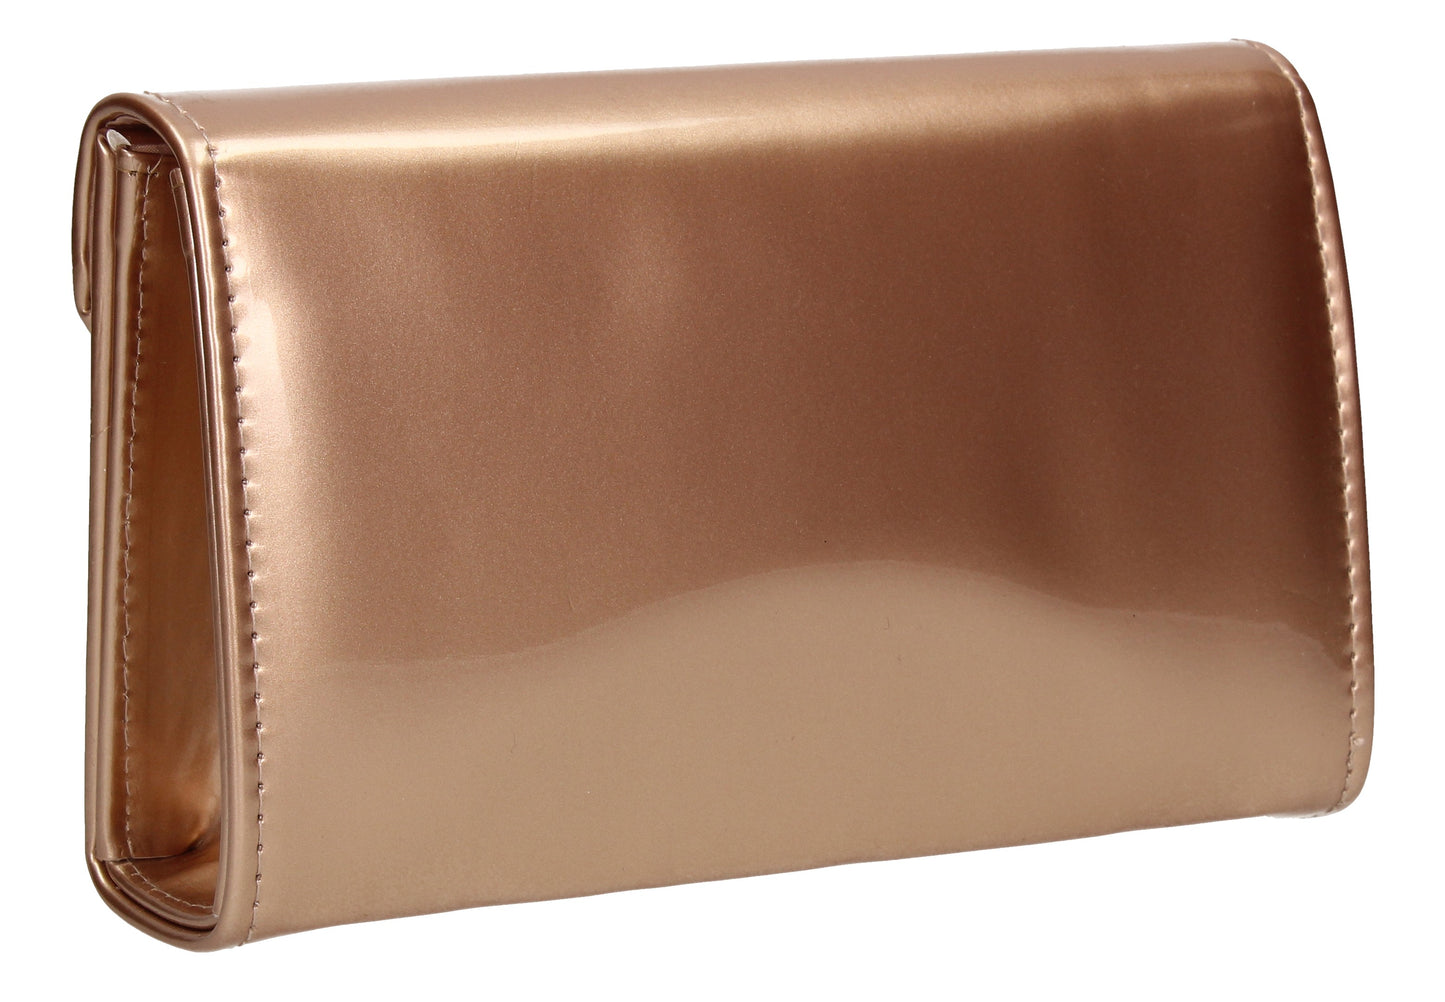 SWANKYSWANS Wendy V Patent Clutch Bag Champagne Cute Cheap Clutch Bag For Weddings School and Work